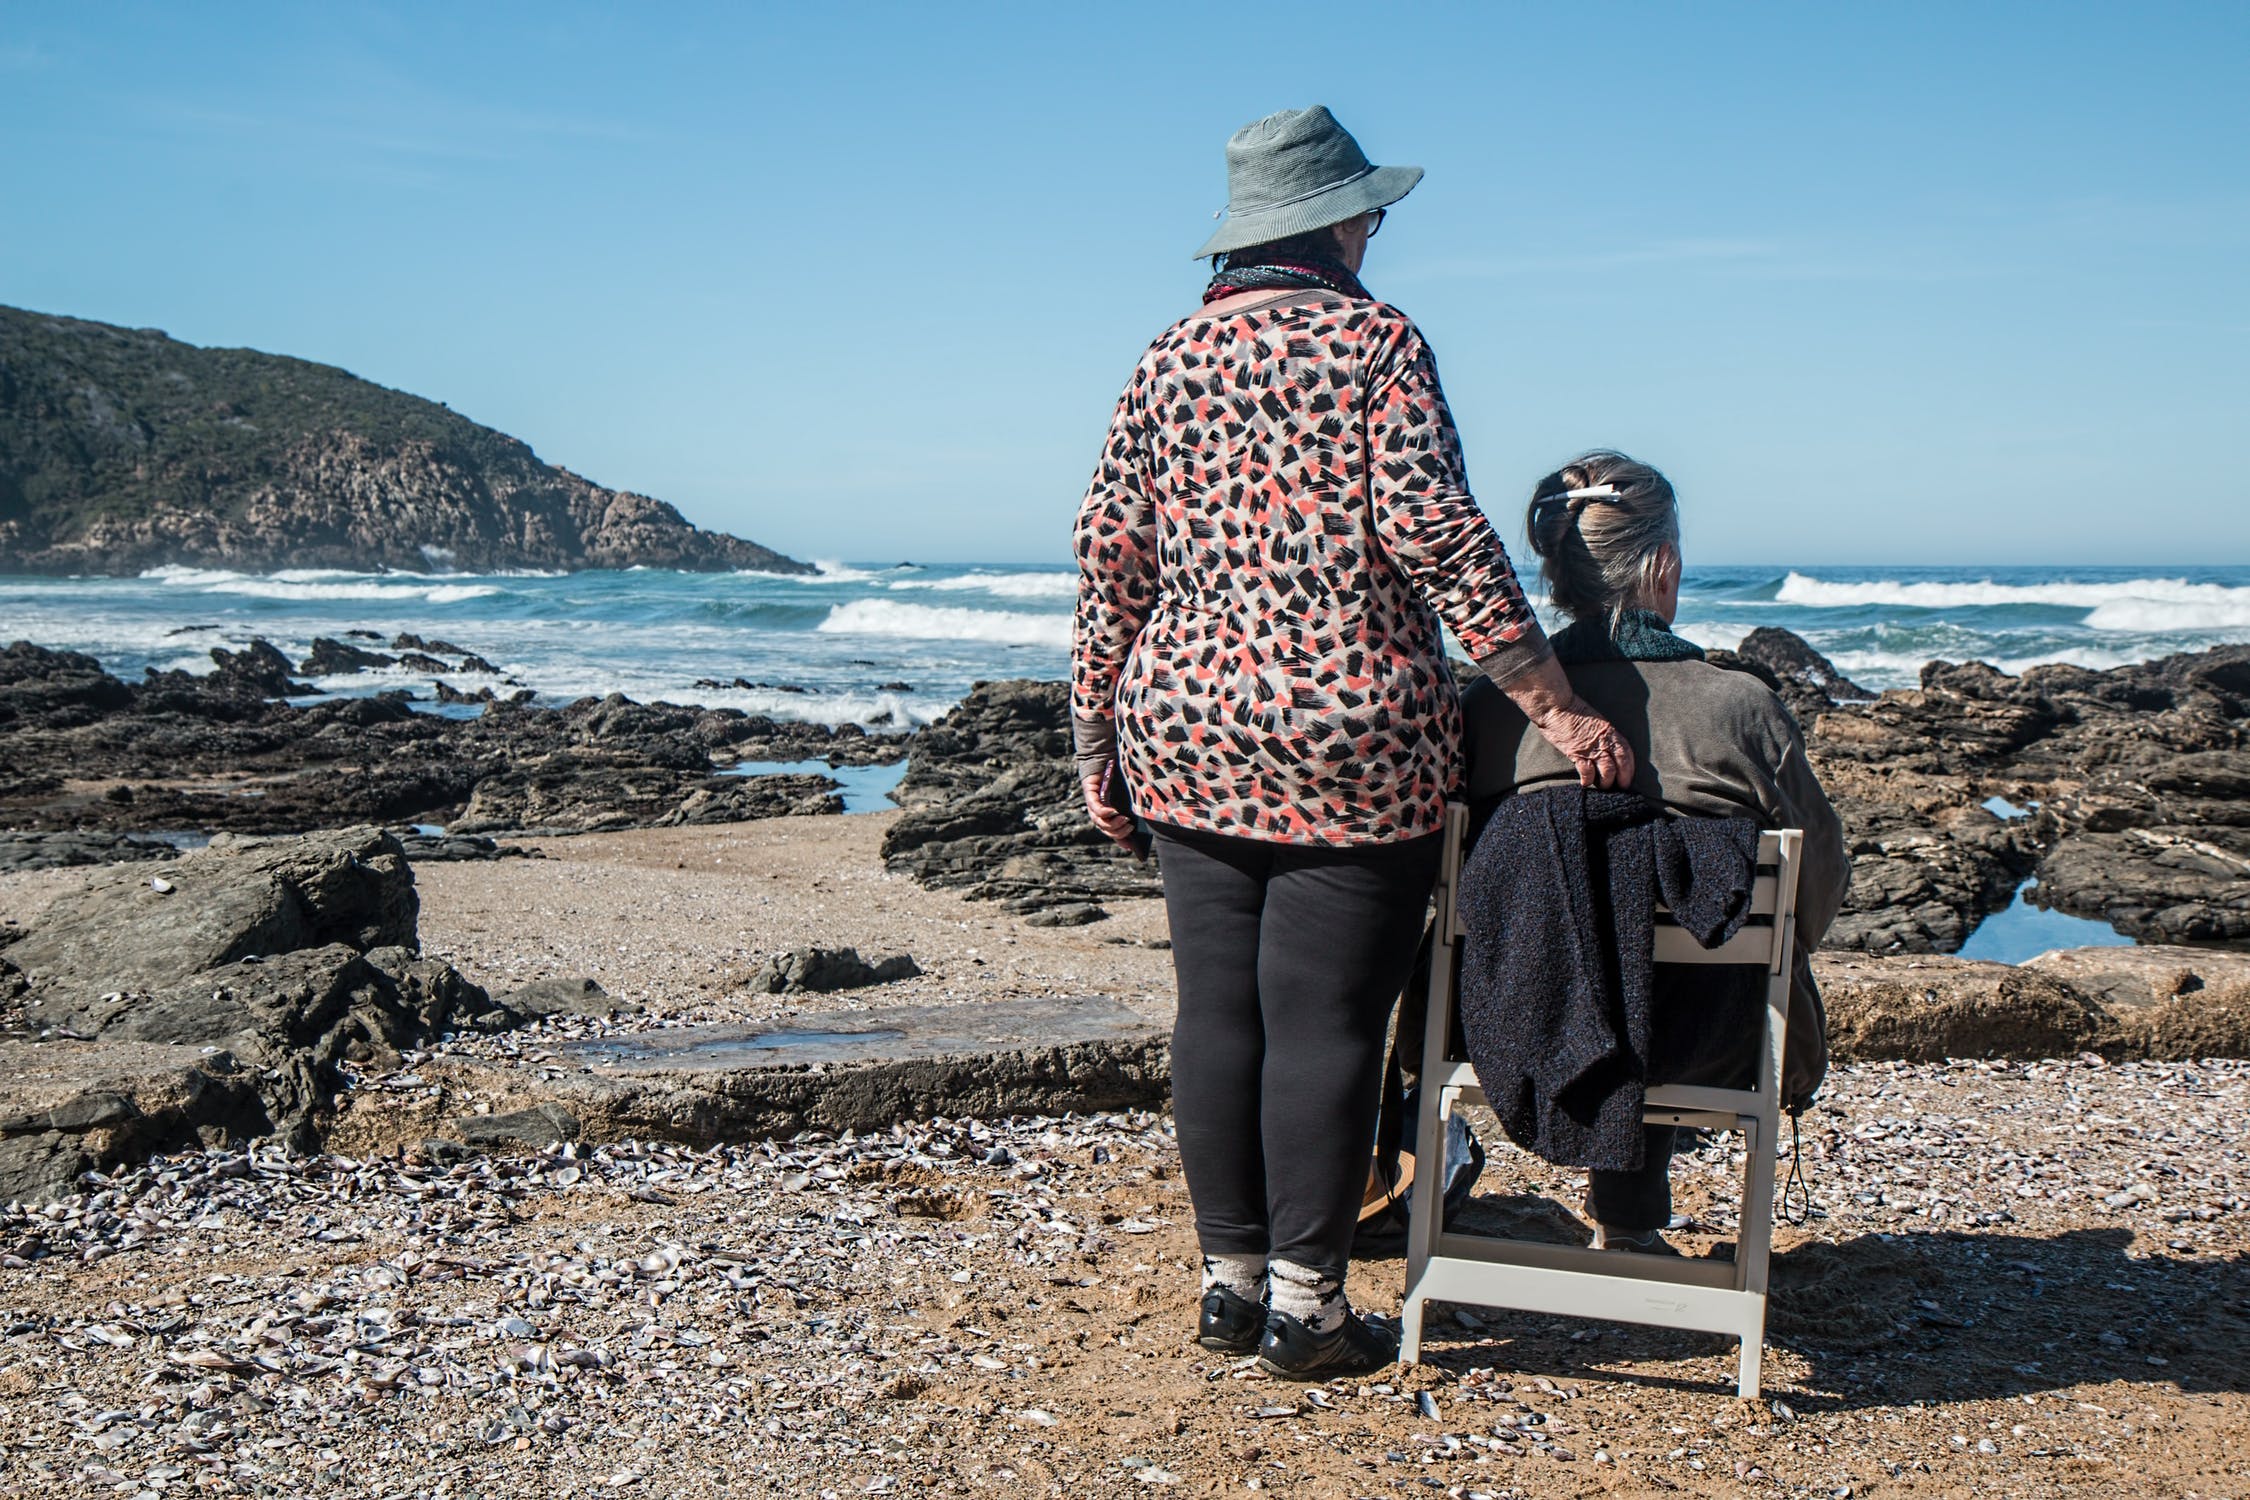 Two women at the beach with one sitting in a chair